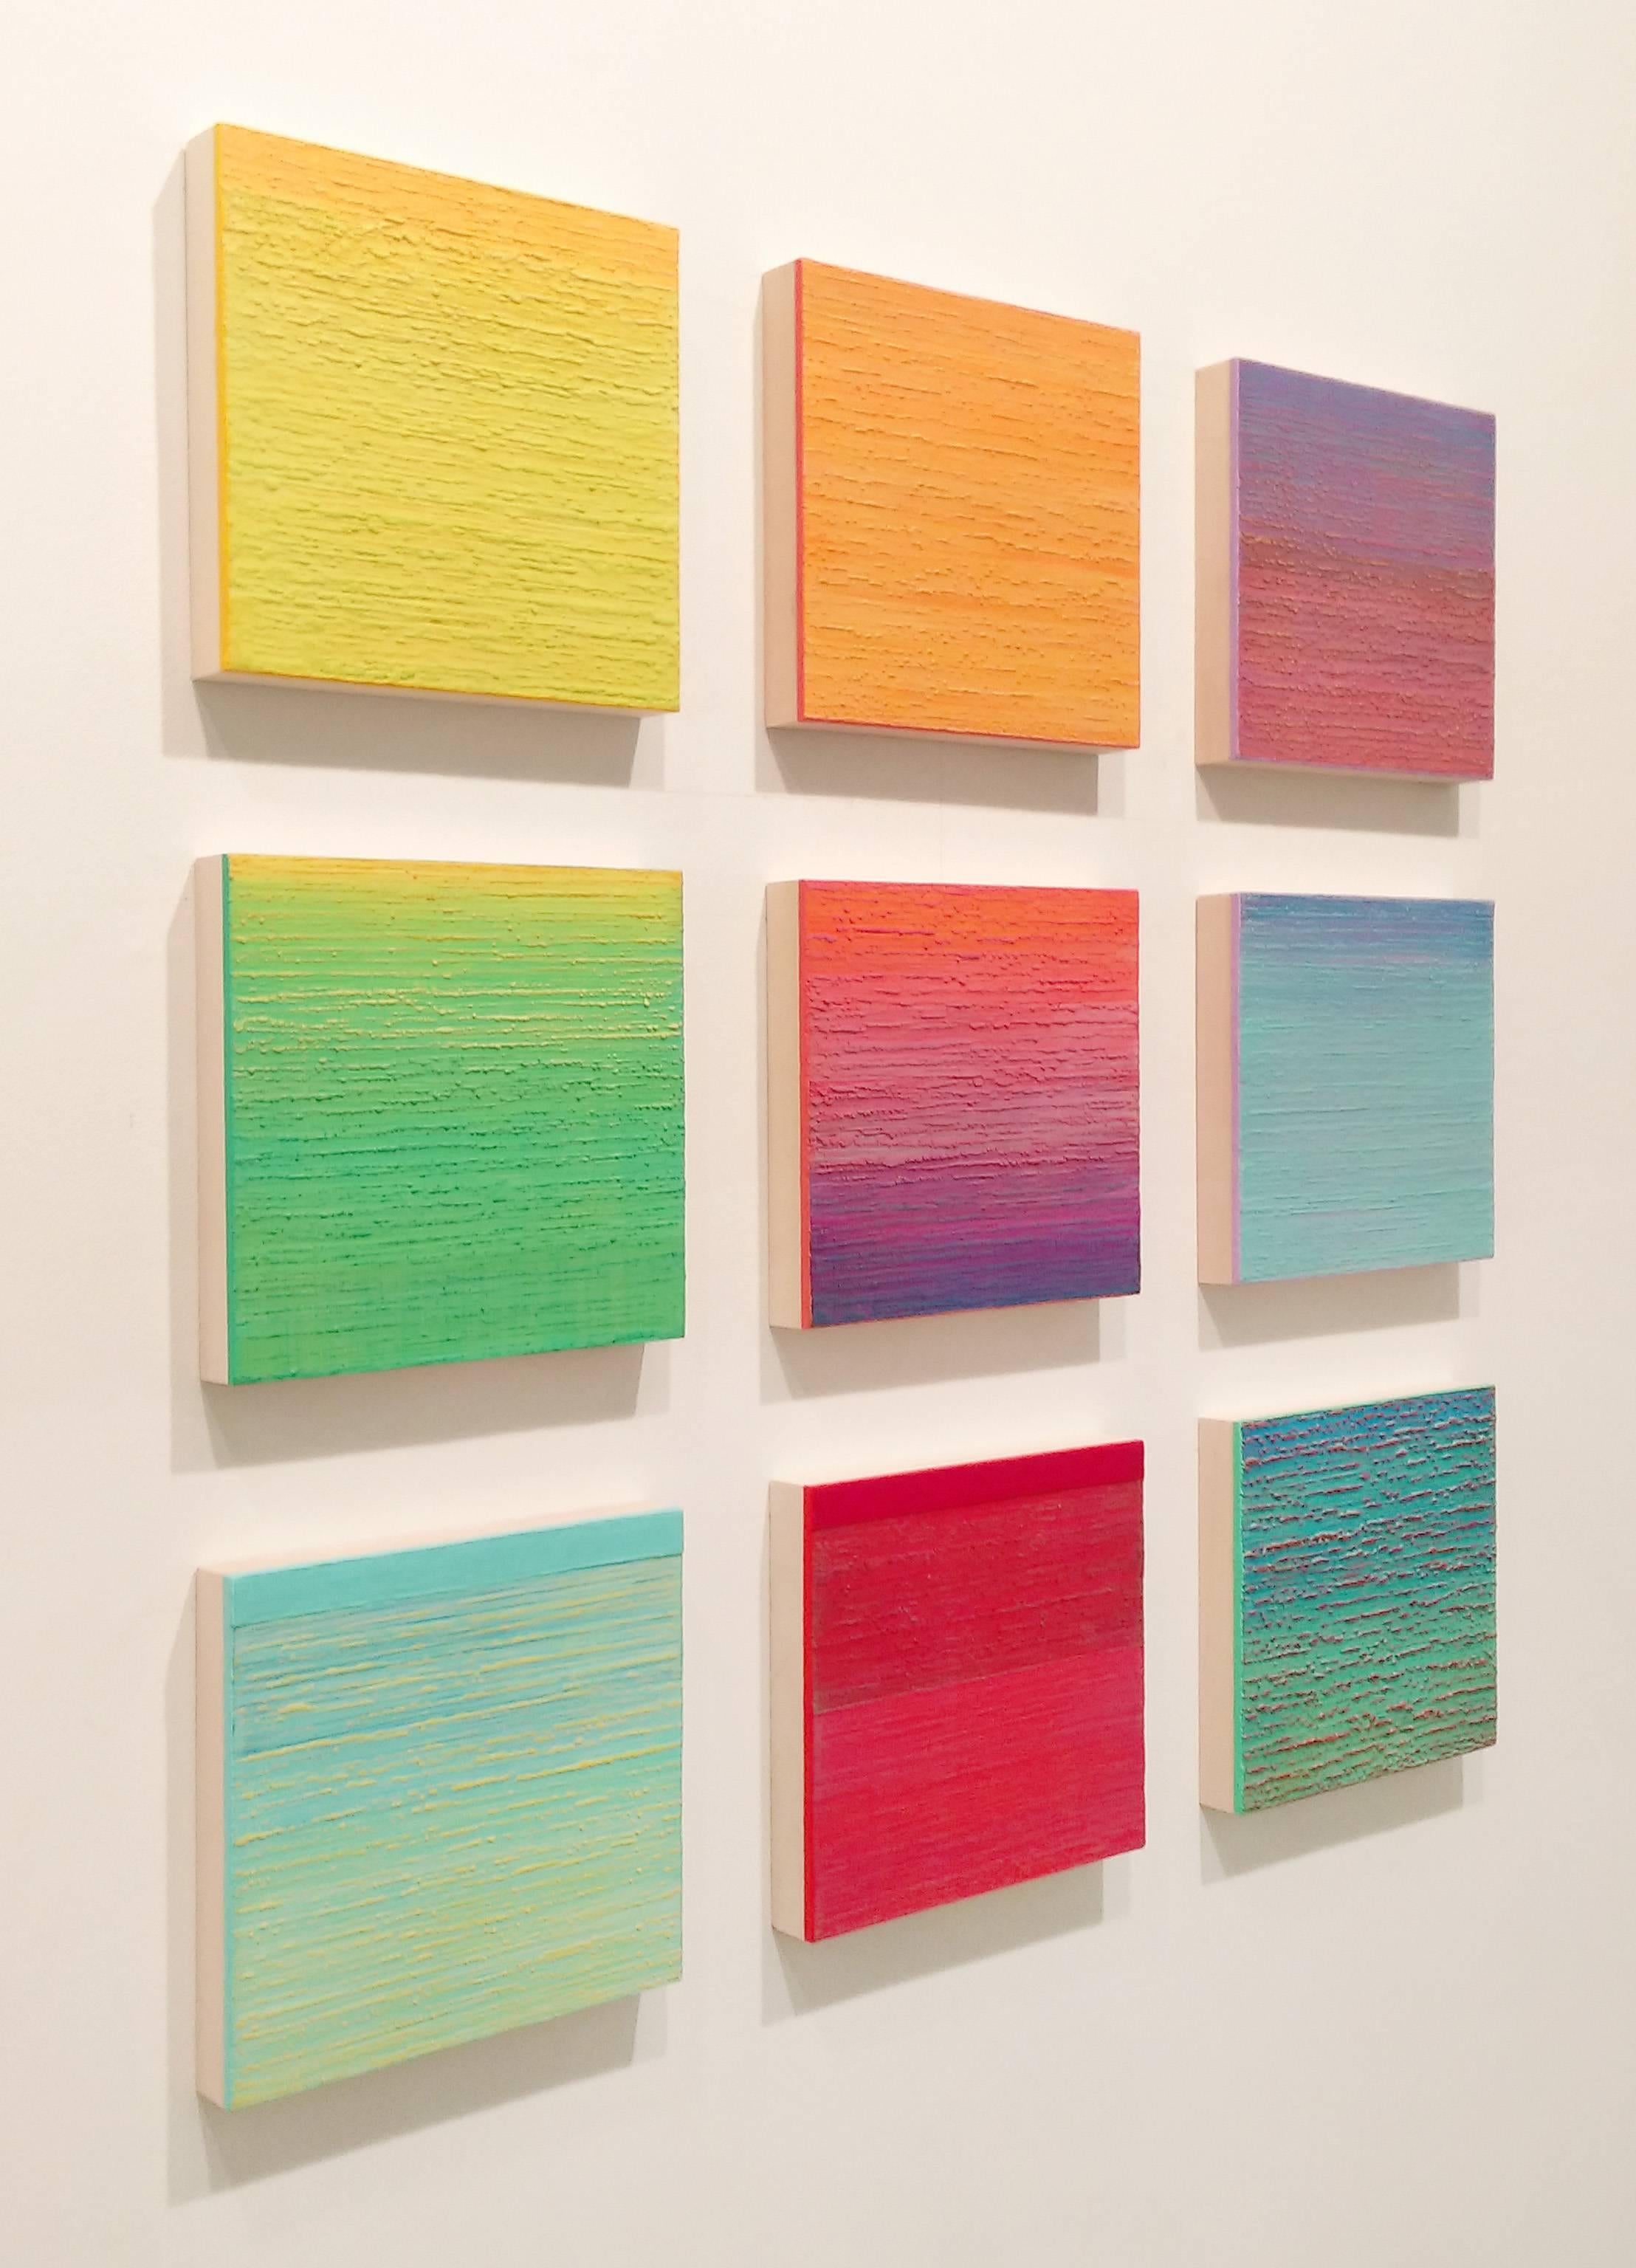 Joanne Mattera's Silk Road 365 is primarily tones of blue and green with streaks of red across the surface.

Succulent in color and reductive or repetitive in composition, Joanne Mattera’s ongoing Silk Road series of paintings are achieved by